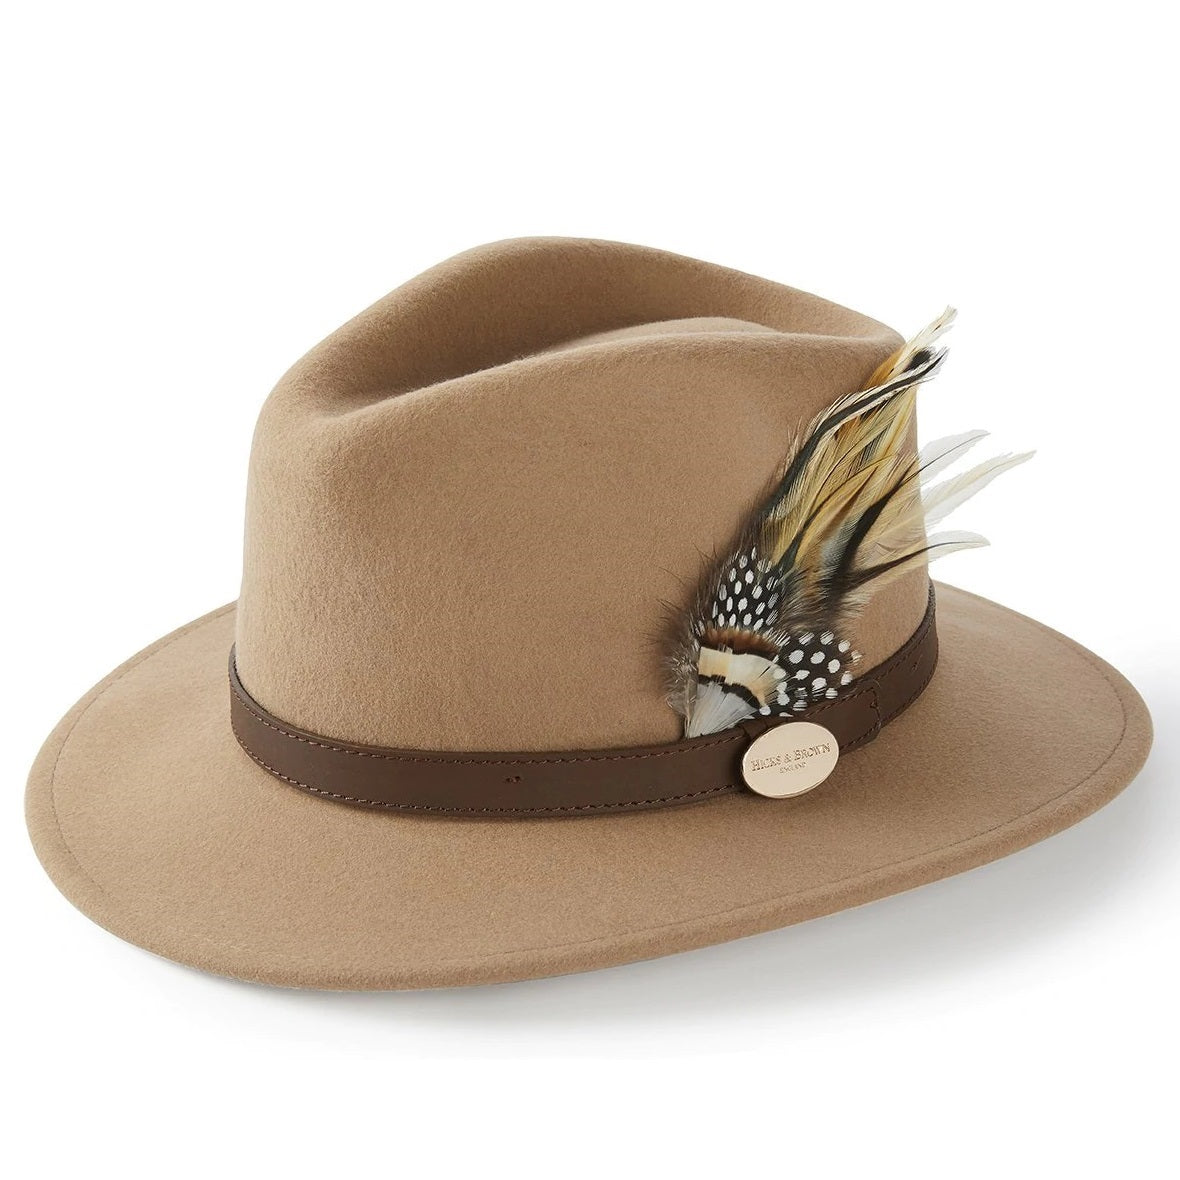 HICKS & BROWN Ladies Suffolk Fedora Hat - Guinea and Pheasant Feather - Camel